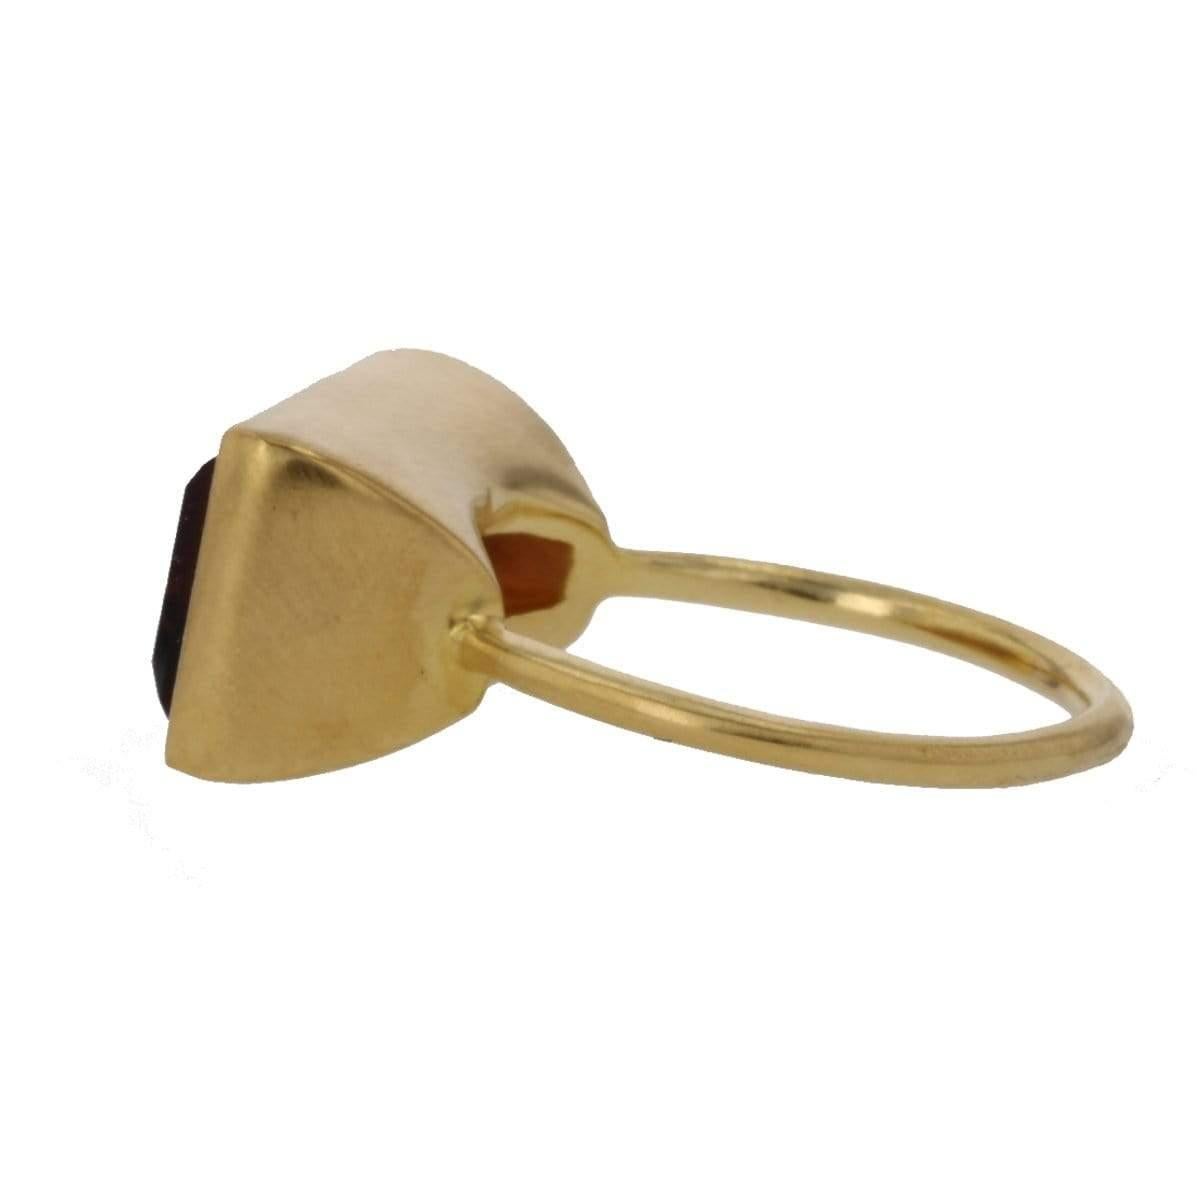 Gloria (like Steinem)

The Gloria Ring is inspired by my favorite feminist, Gloria Steinem. Always classy, beautiful, and strong. This ring packs a punch with its unusual juxtaposition of the thin band and large, rectangular setting.

Product